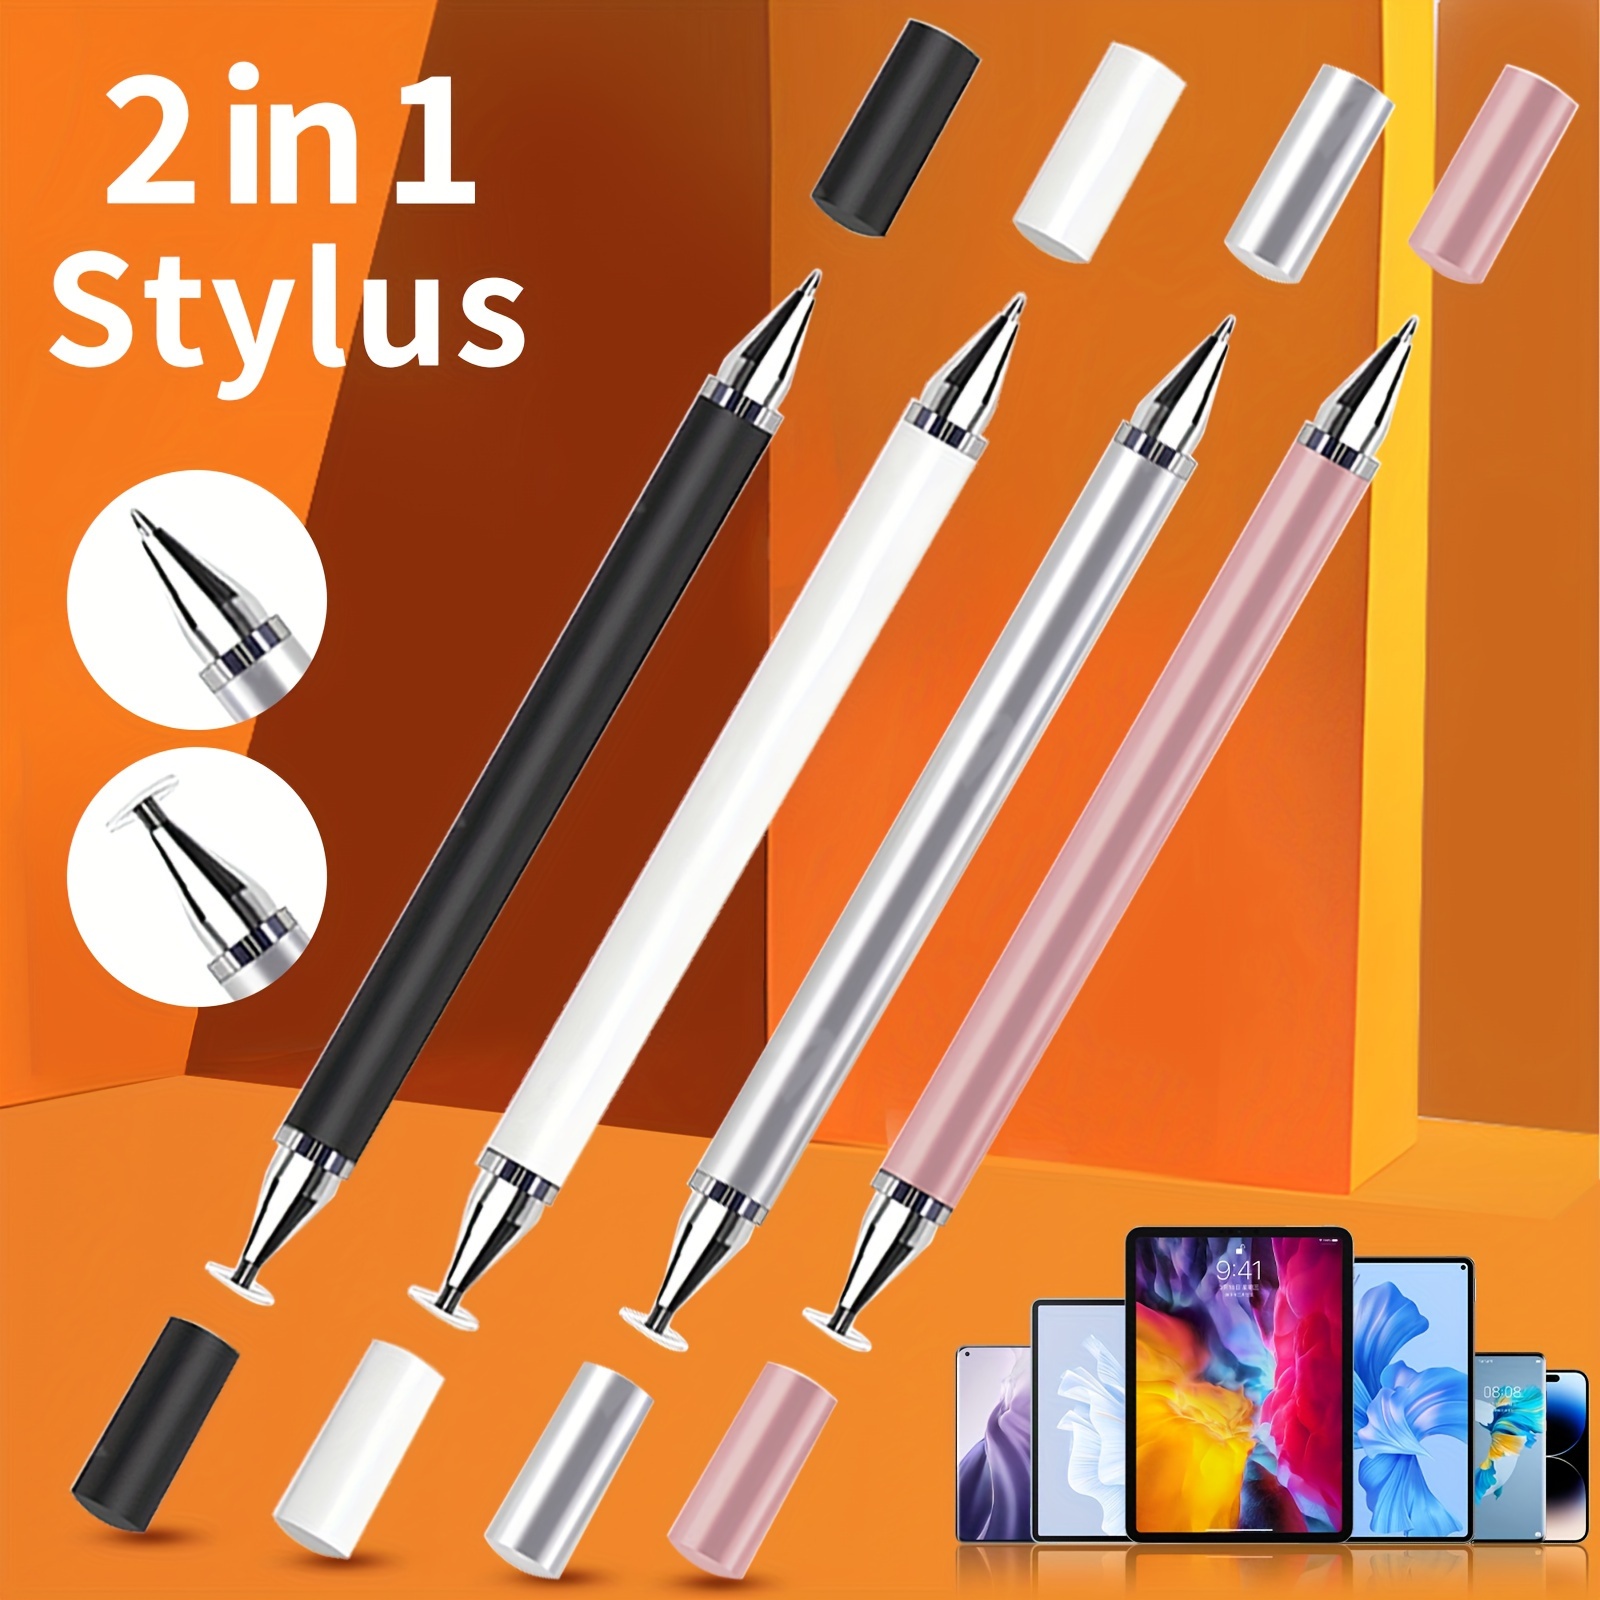 Stylus for Touch Screens (2pcs), Smallest Disc Tip Universal Touch Pen for  Apple iPad/Pro/Air/Mini/iPhone/Max/Samsung Galaxy Tablet/ Fire